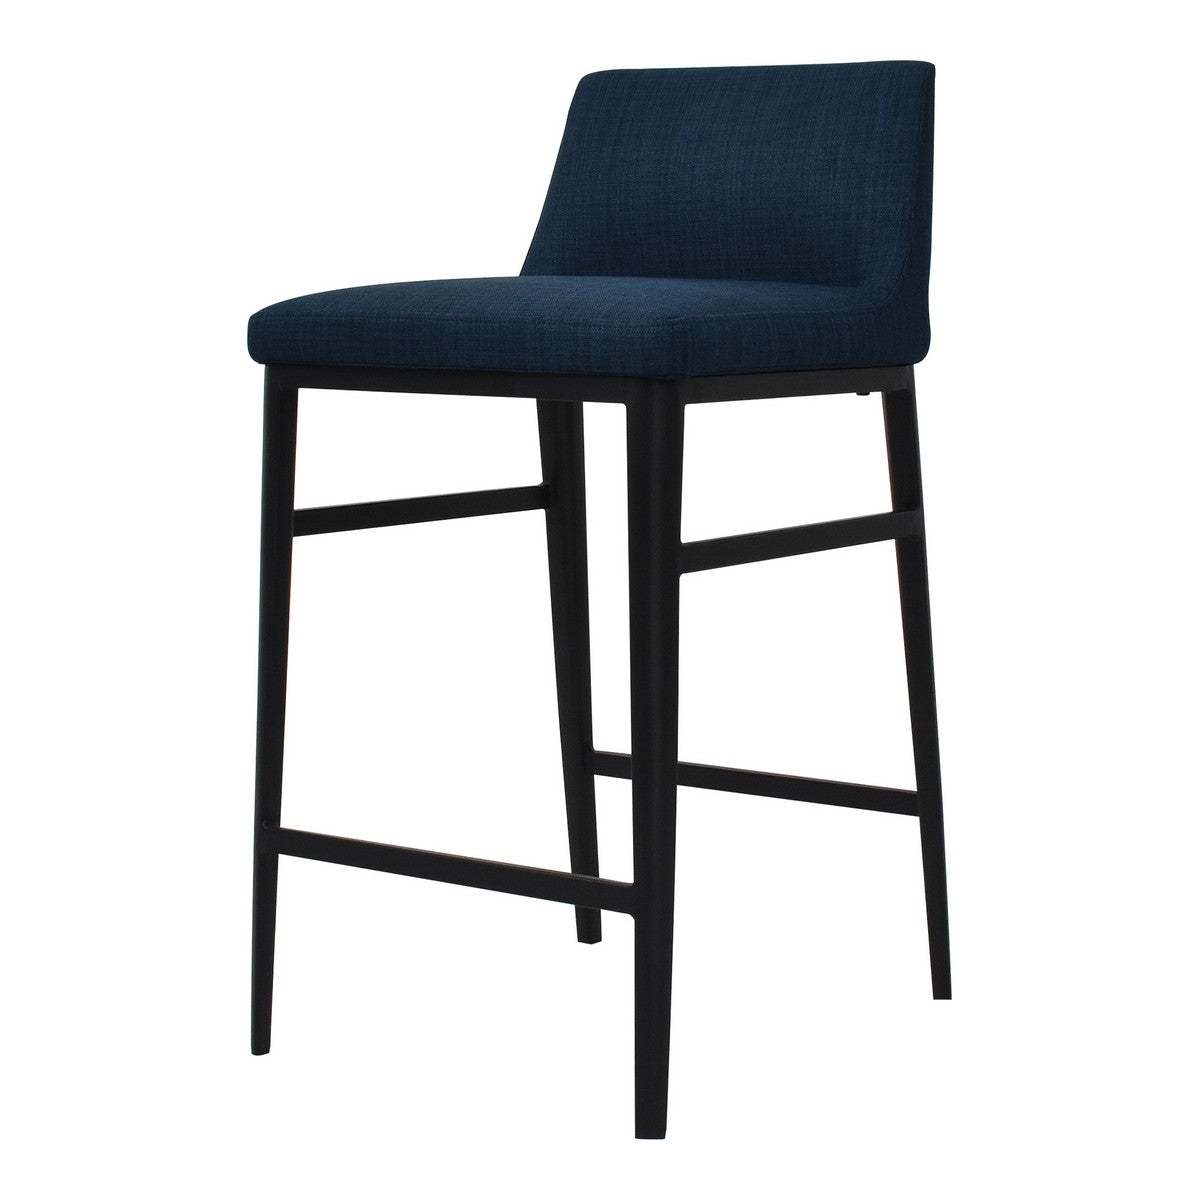 Moe's Home Collection Baron Counter Stool Blue - EJ-1031-26